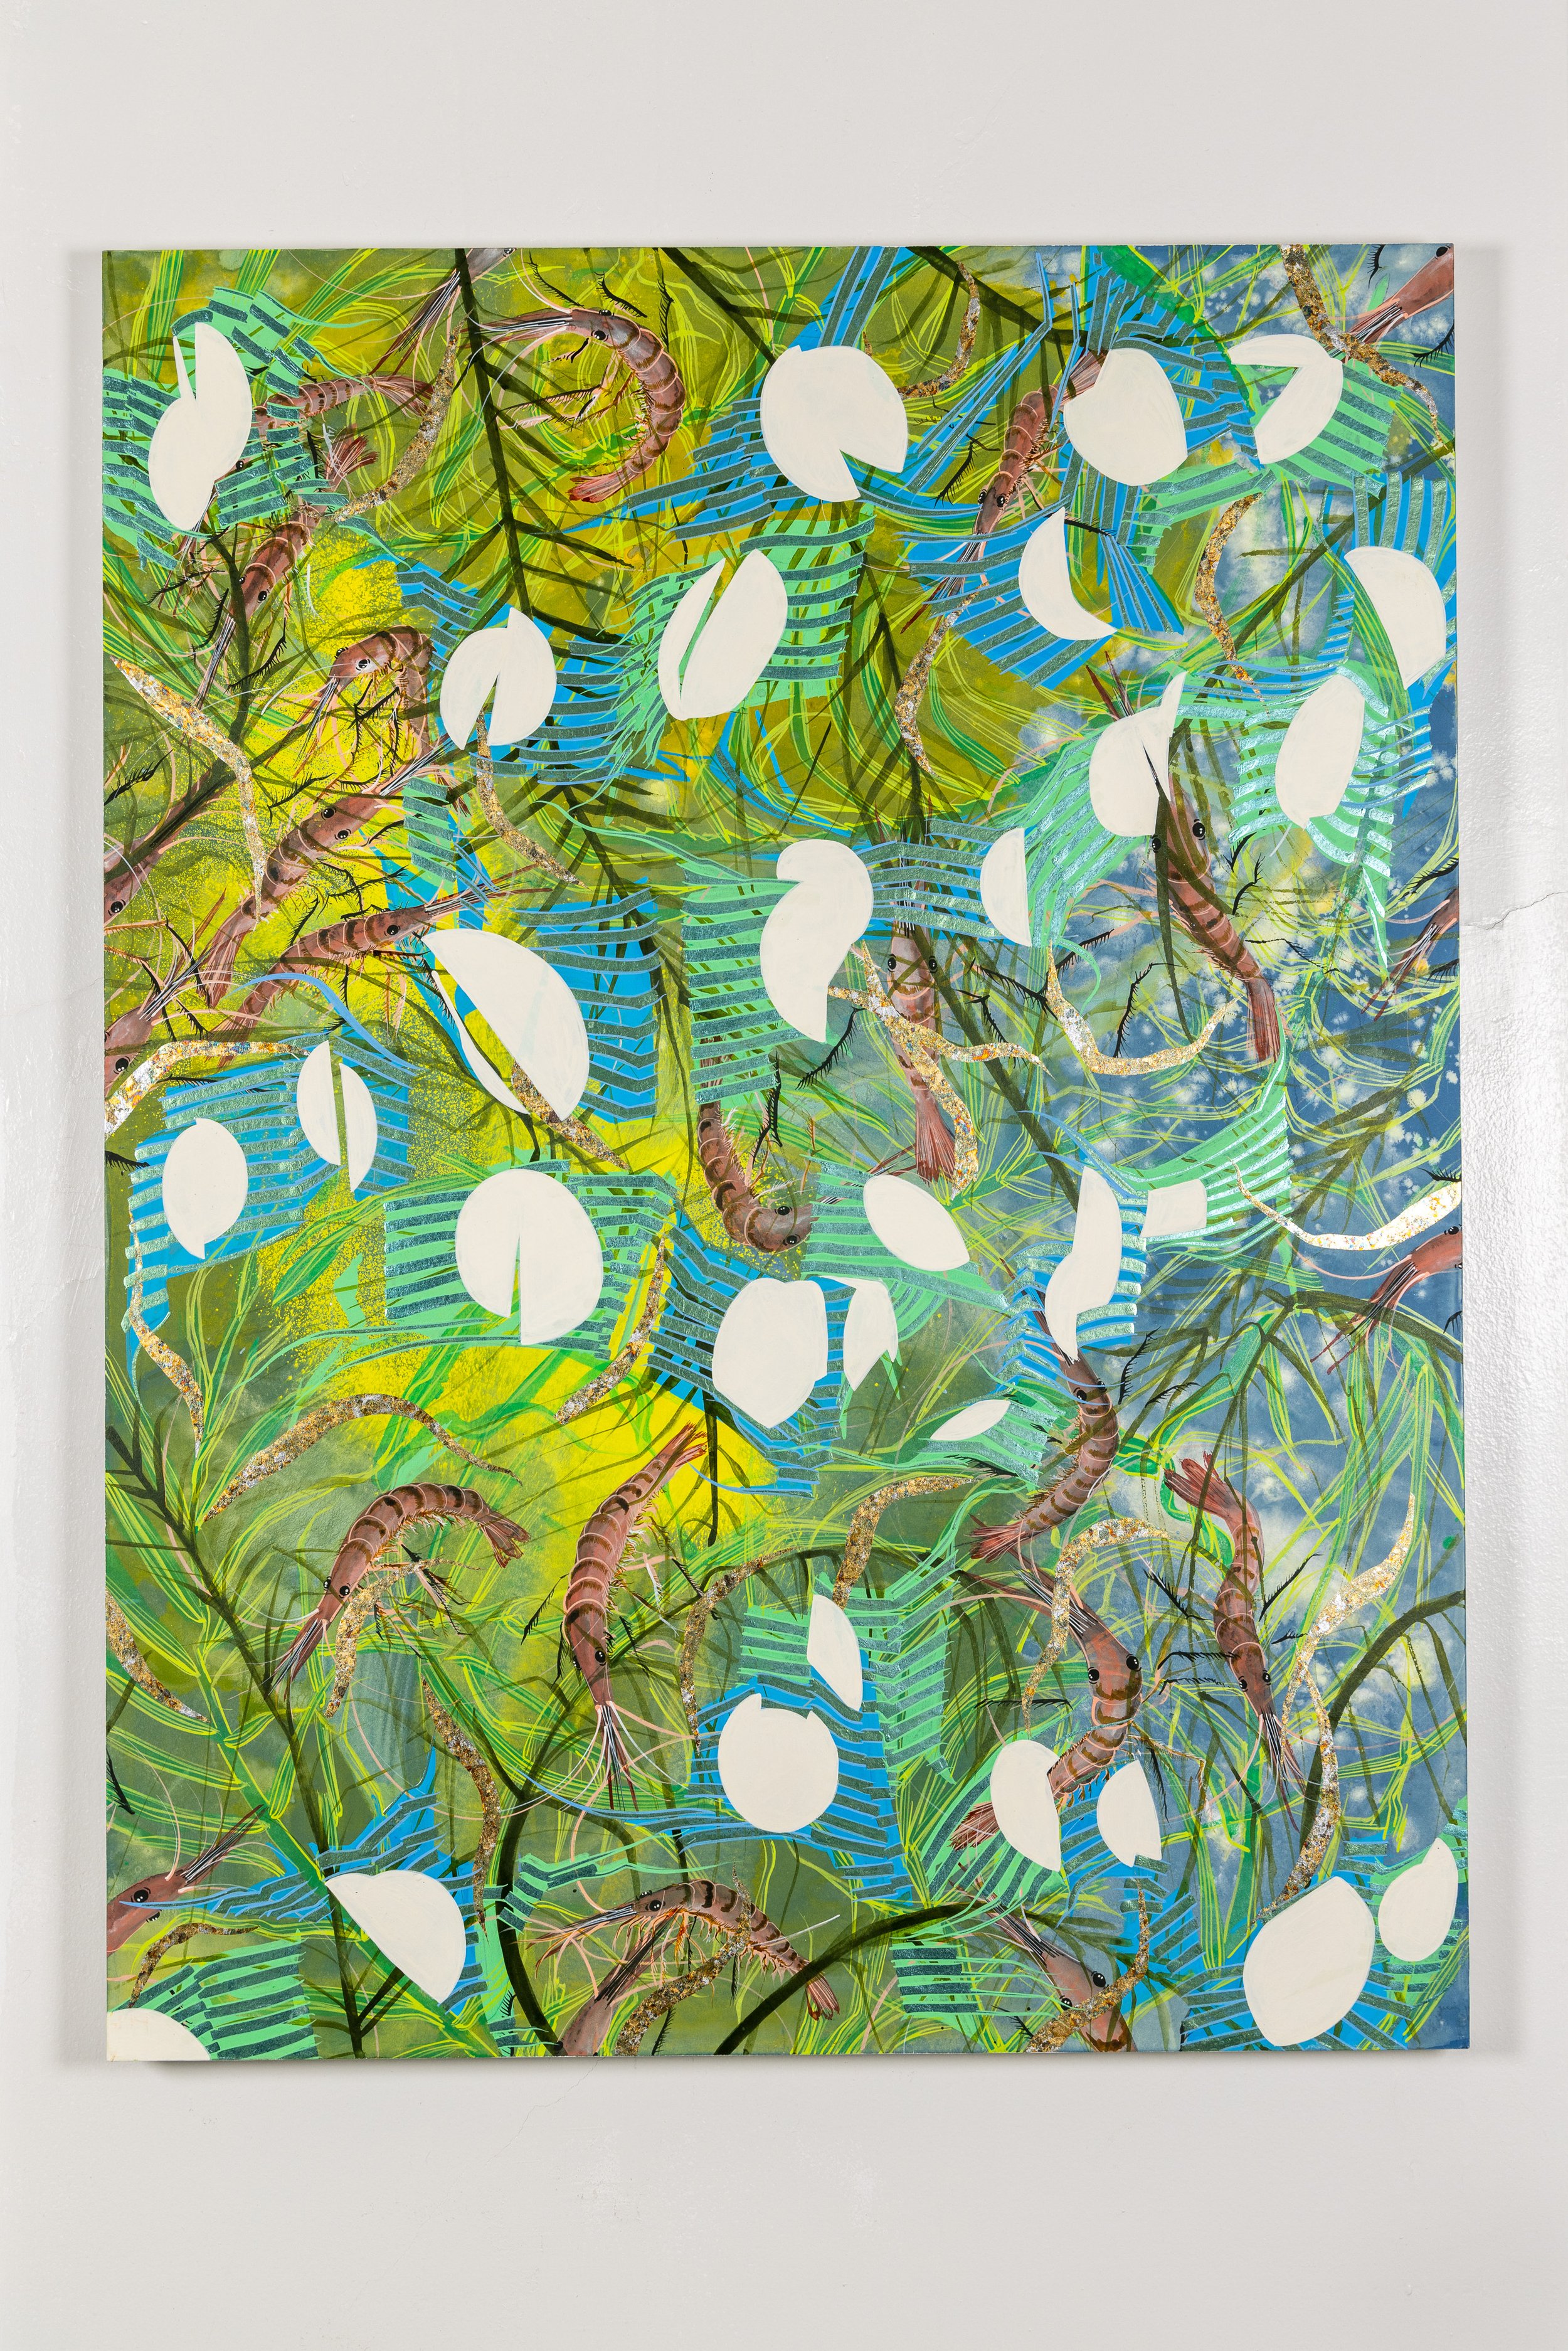 Tammy Nguyen, Seasons of Revolution I, 2021,Watercolor, vinyl paint, pastel, and metal leaf on paper stretched over wood panel 48 x 36 inches